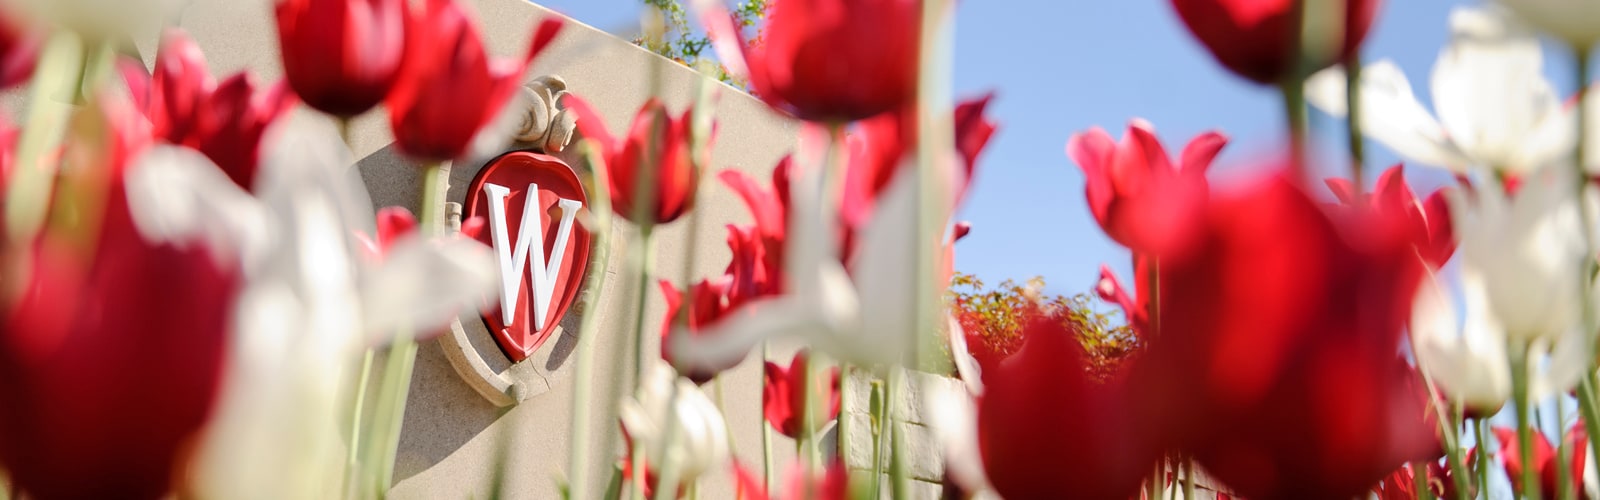 Flowering red and white tulips frame a the W crest icon that is a part of a landscaped roundabout at Observatory Drive and Walnut Street.